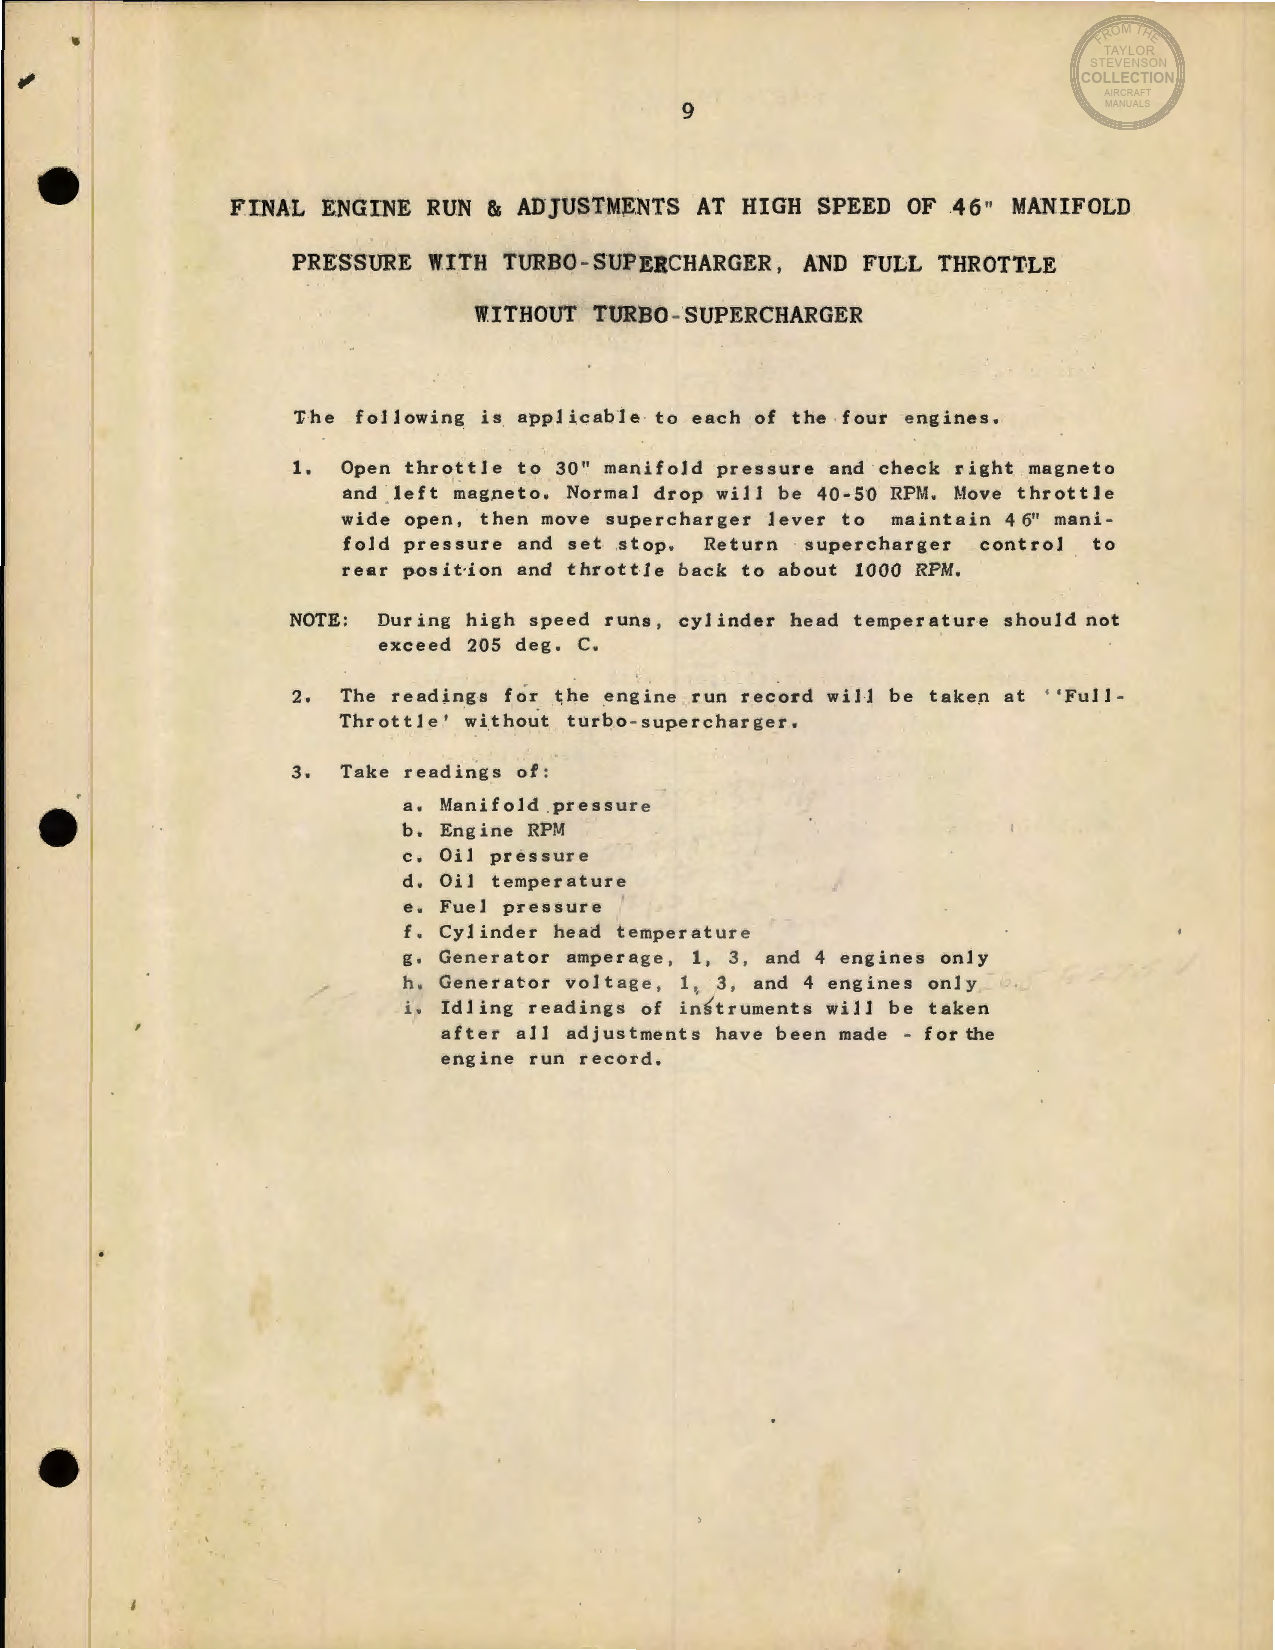 Sample page 1 from AirCorps Library document: Final Engine Run & Adjustments at High Speed of 46